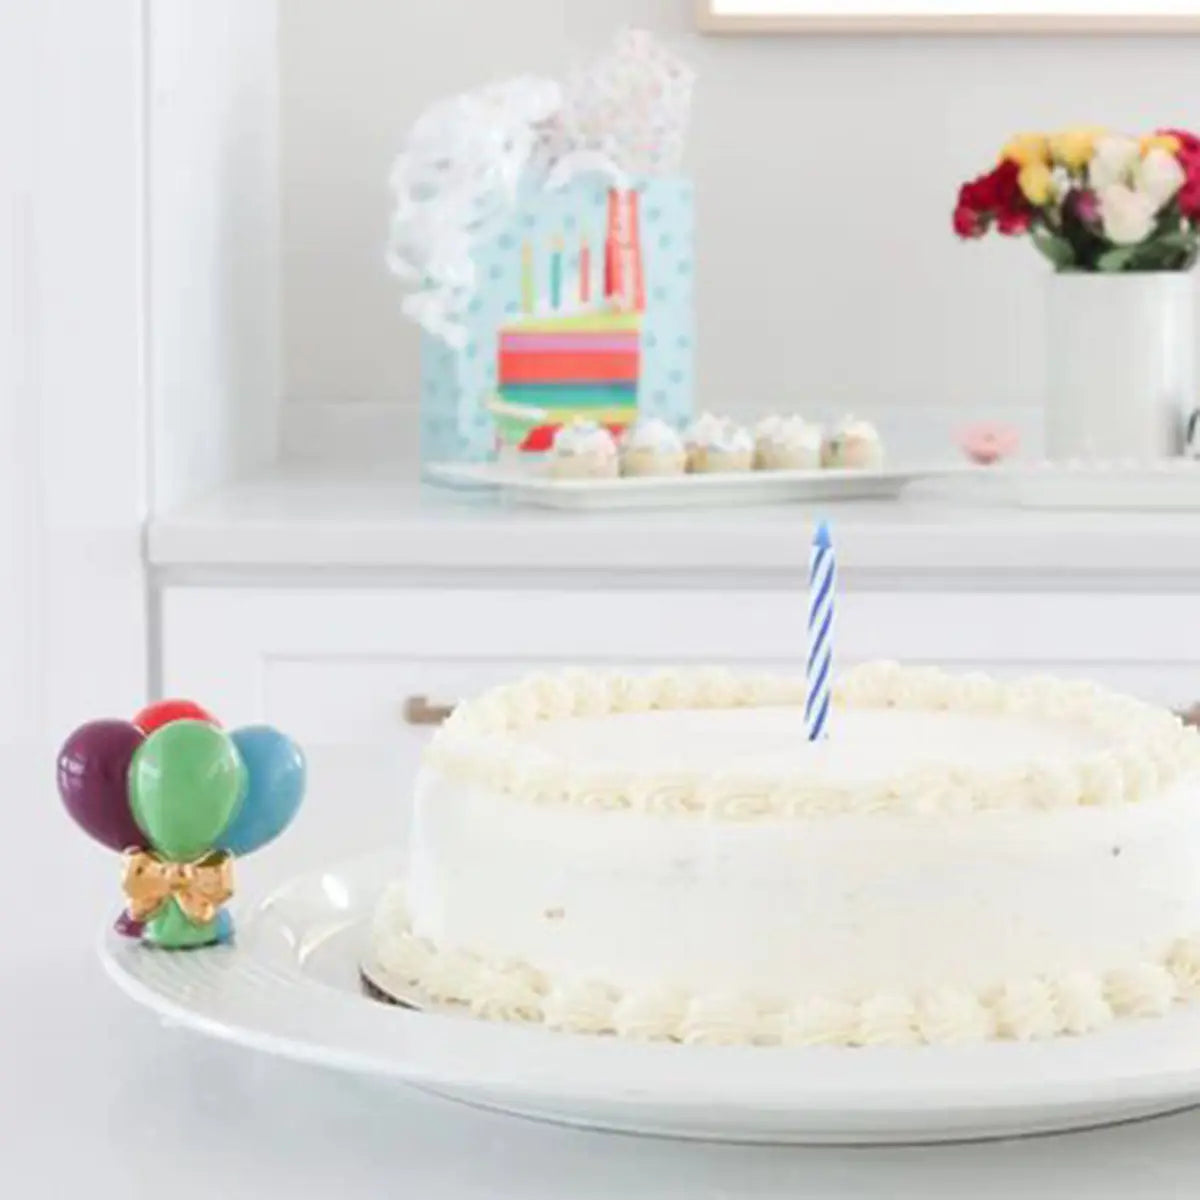 Nora Fleming Pinstripes Round Server in the kitchen with a white frosted cake on top and birthday balloon mini.